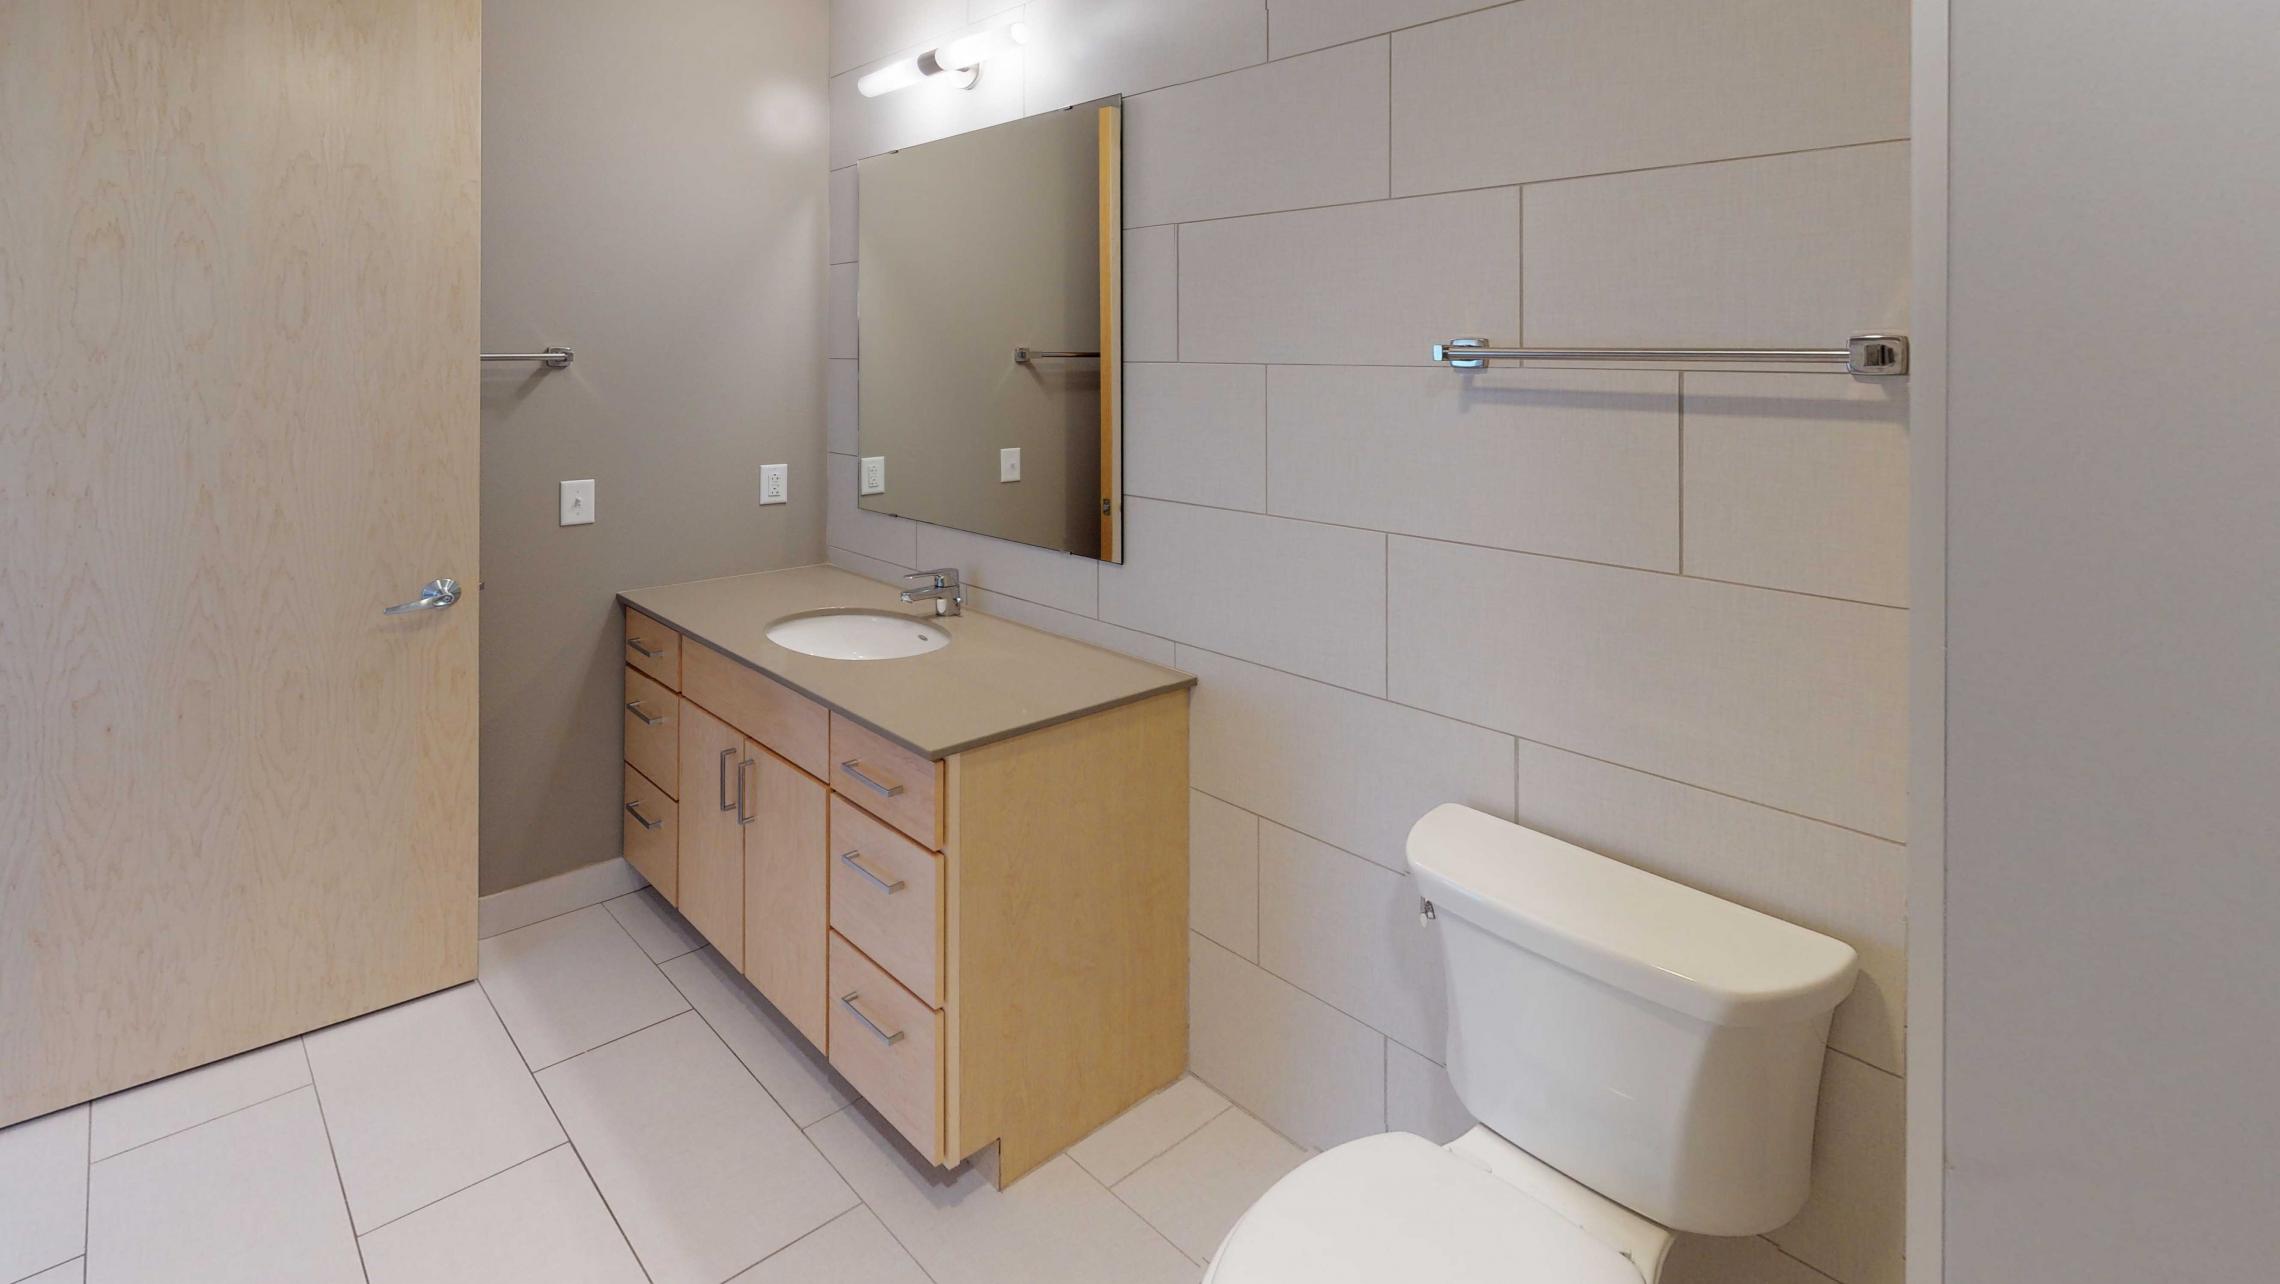 Nine-Line-Apartment-222-One-Bedroom-Living-Kitchen-Upscale-Modern-Design-Downtown-Madison-Sunny-Bright-Lifestyle-Bathroom